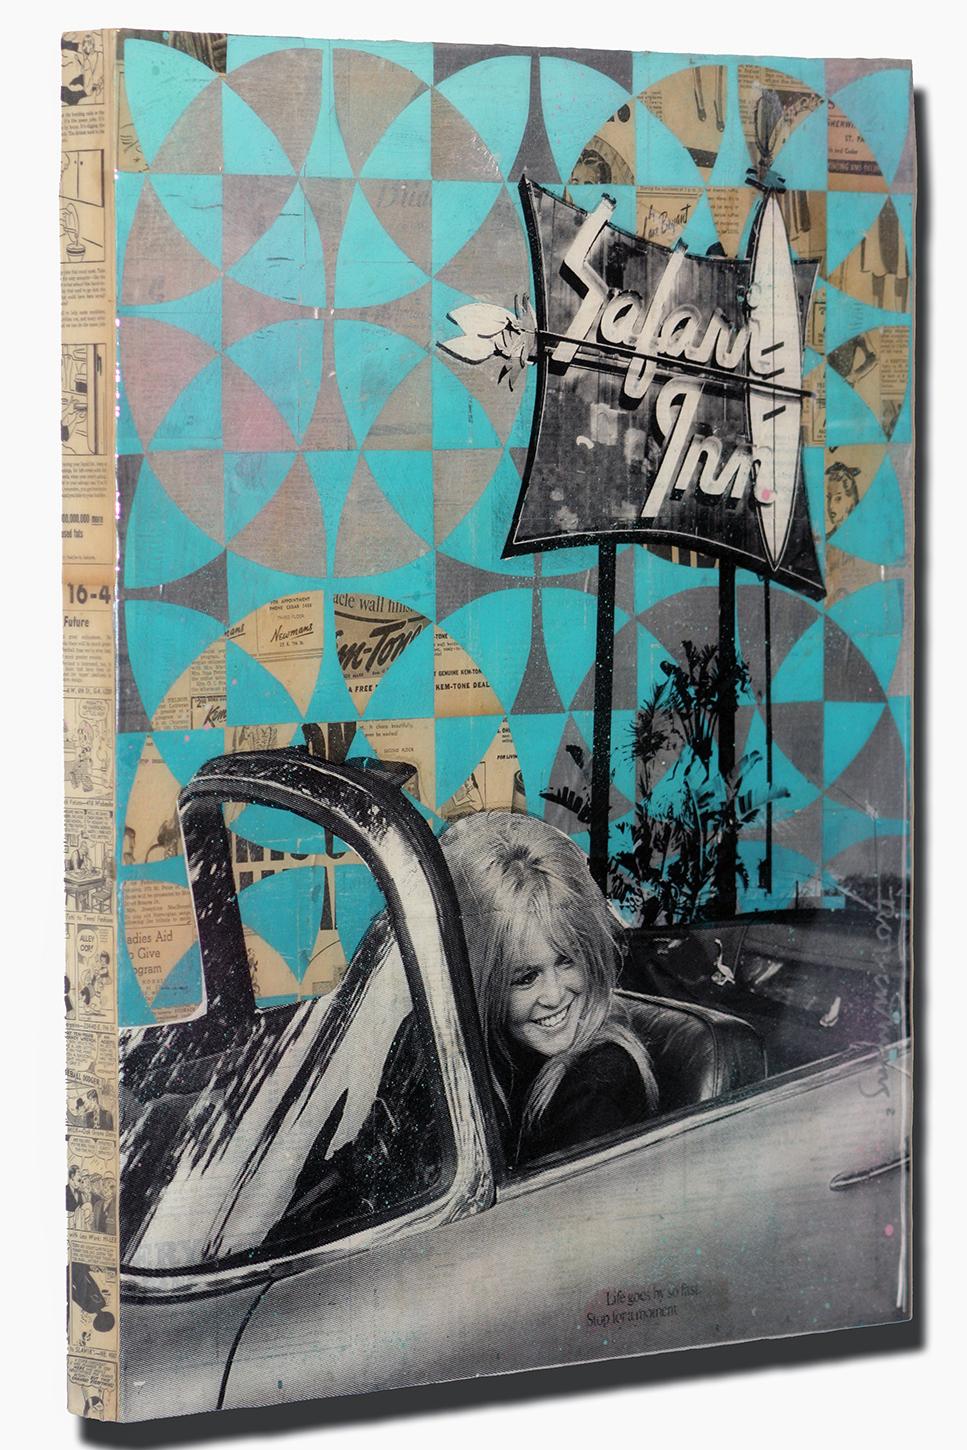 This work by the internationally collected artist Robert Mars features Brigitte Bardot and is titled 